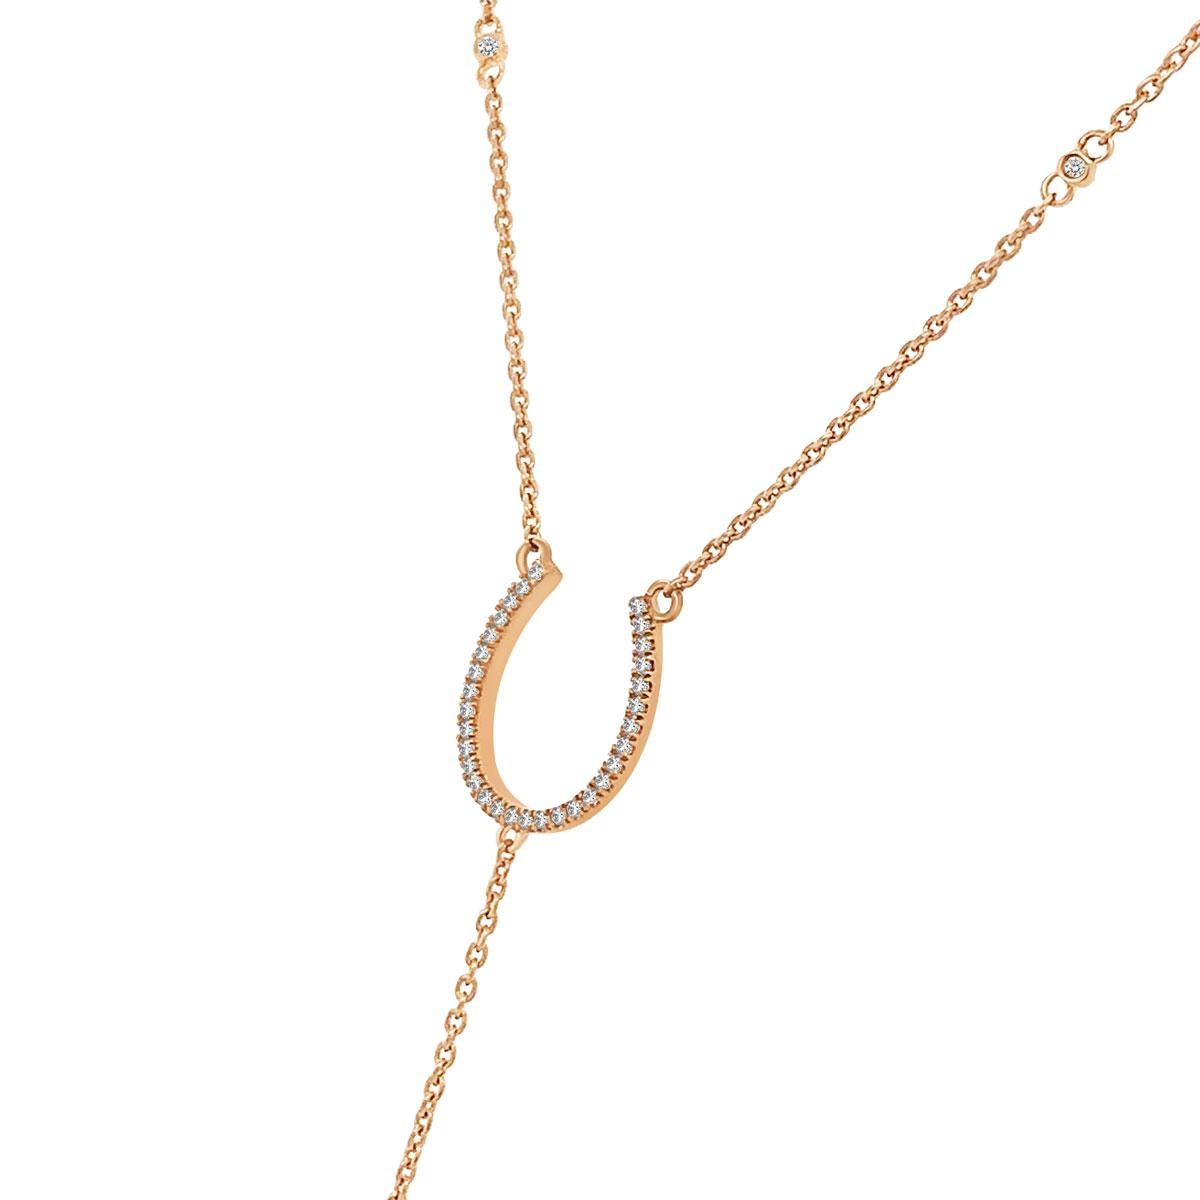 This necklace features four(4) evenly spread brilliant diamonds bezel set on a delicate chain connecting to Horseshoe pendant. An elegant gold drop in hanging from it completing a stunning look. Experience the difference in person!

Product details: